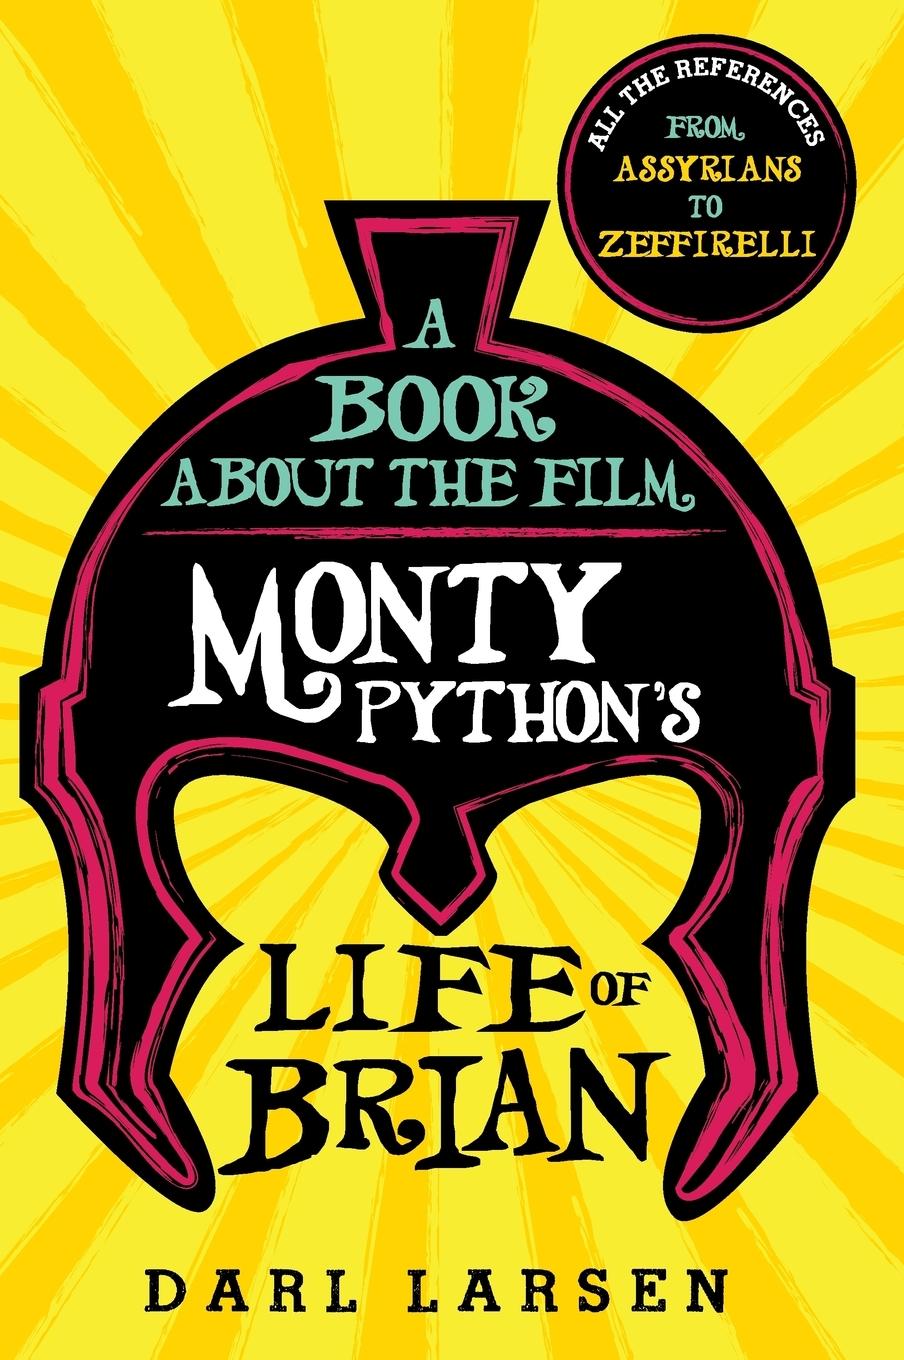 A Book about the Film Monty Python s Life of Brian - Larsen, Darl